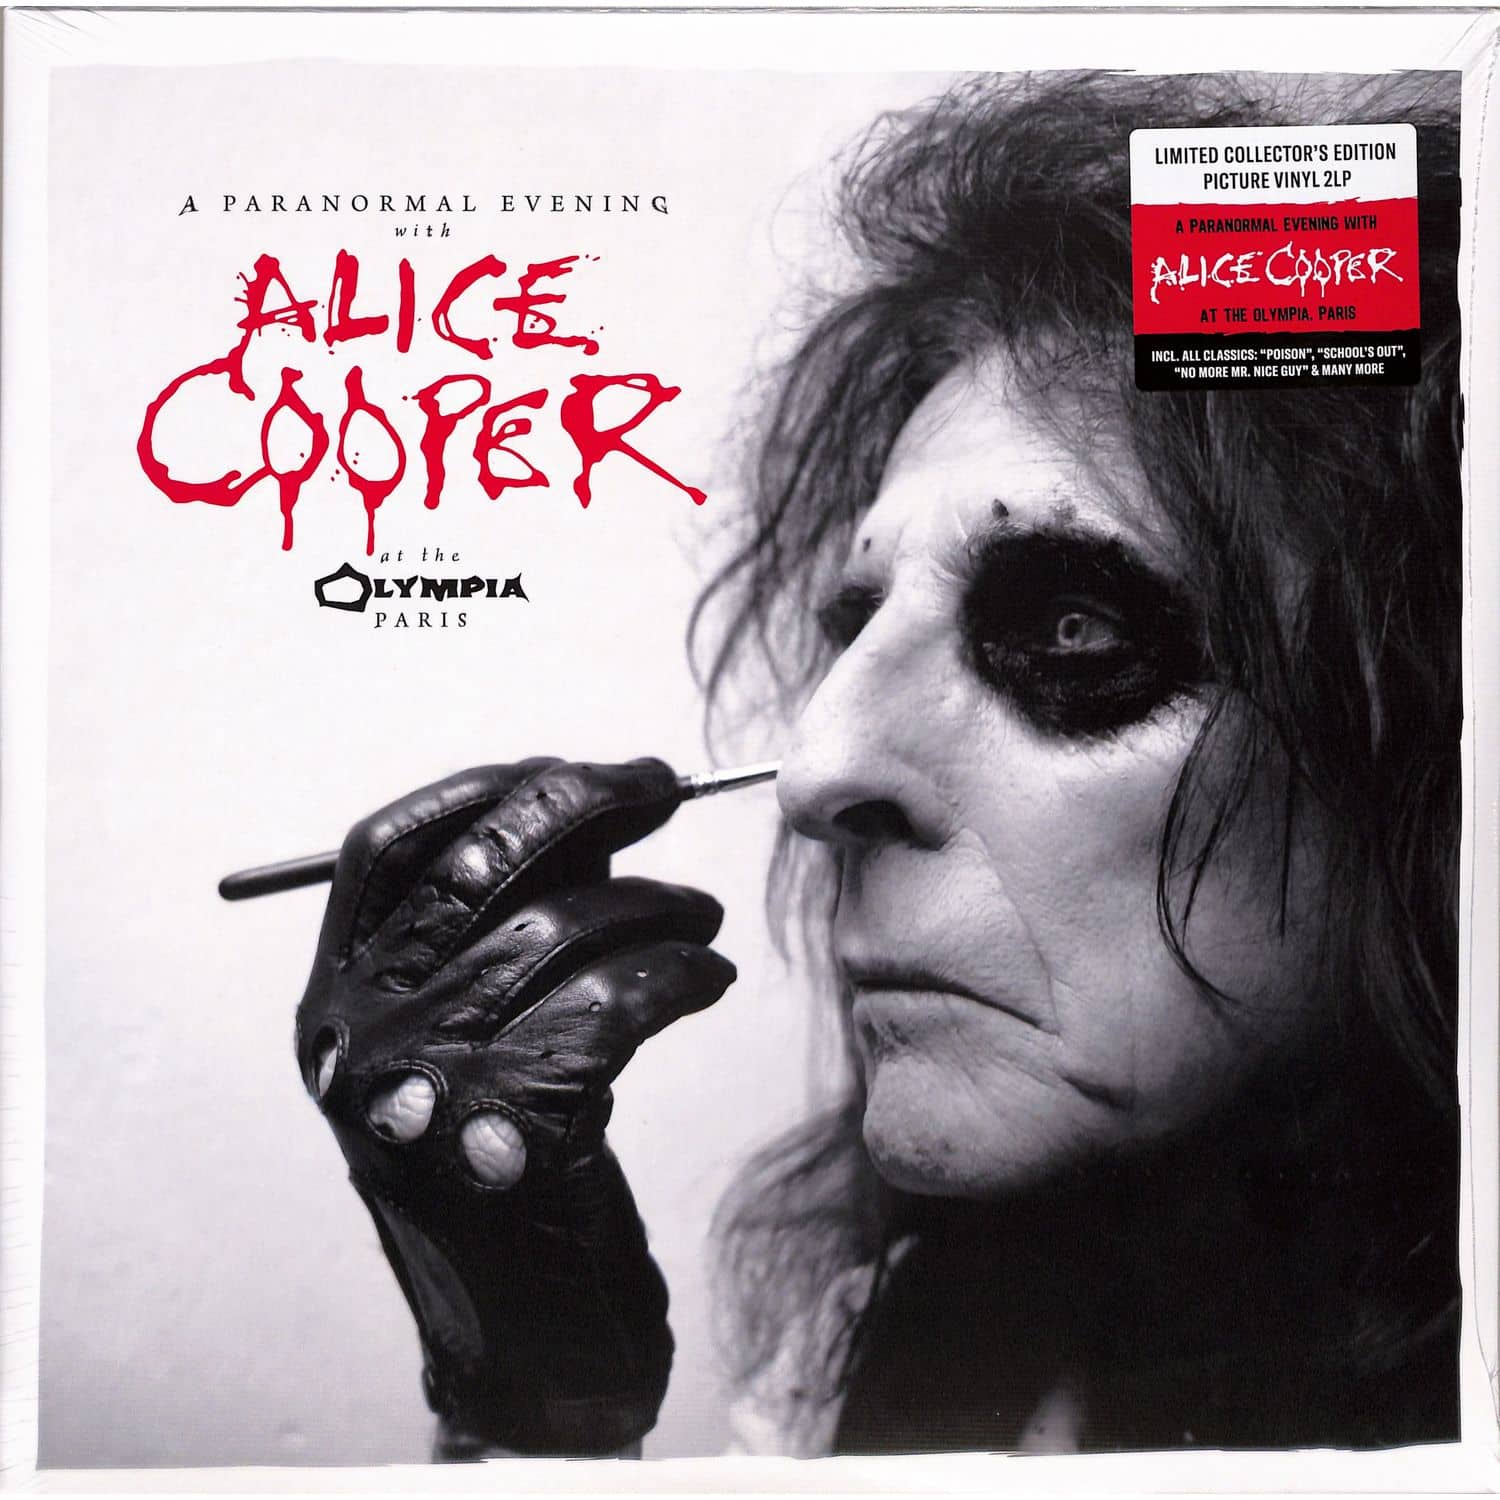 Alice Cooper - A PARANORMAL EVENING 